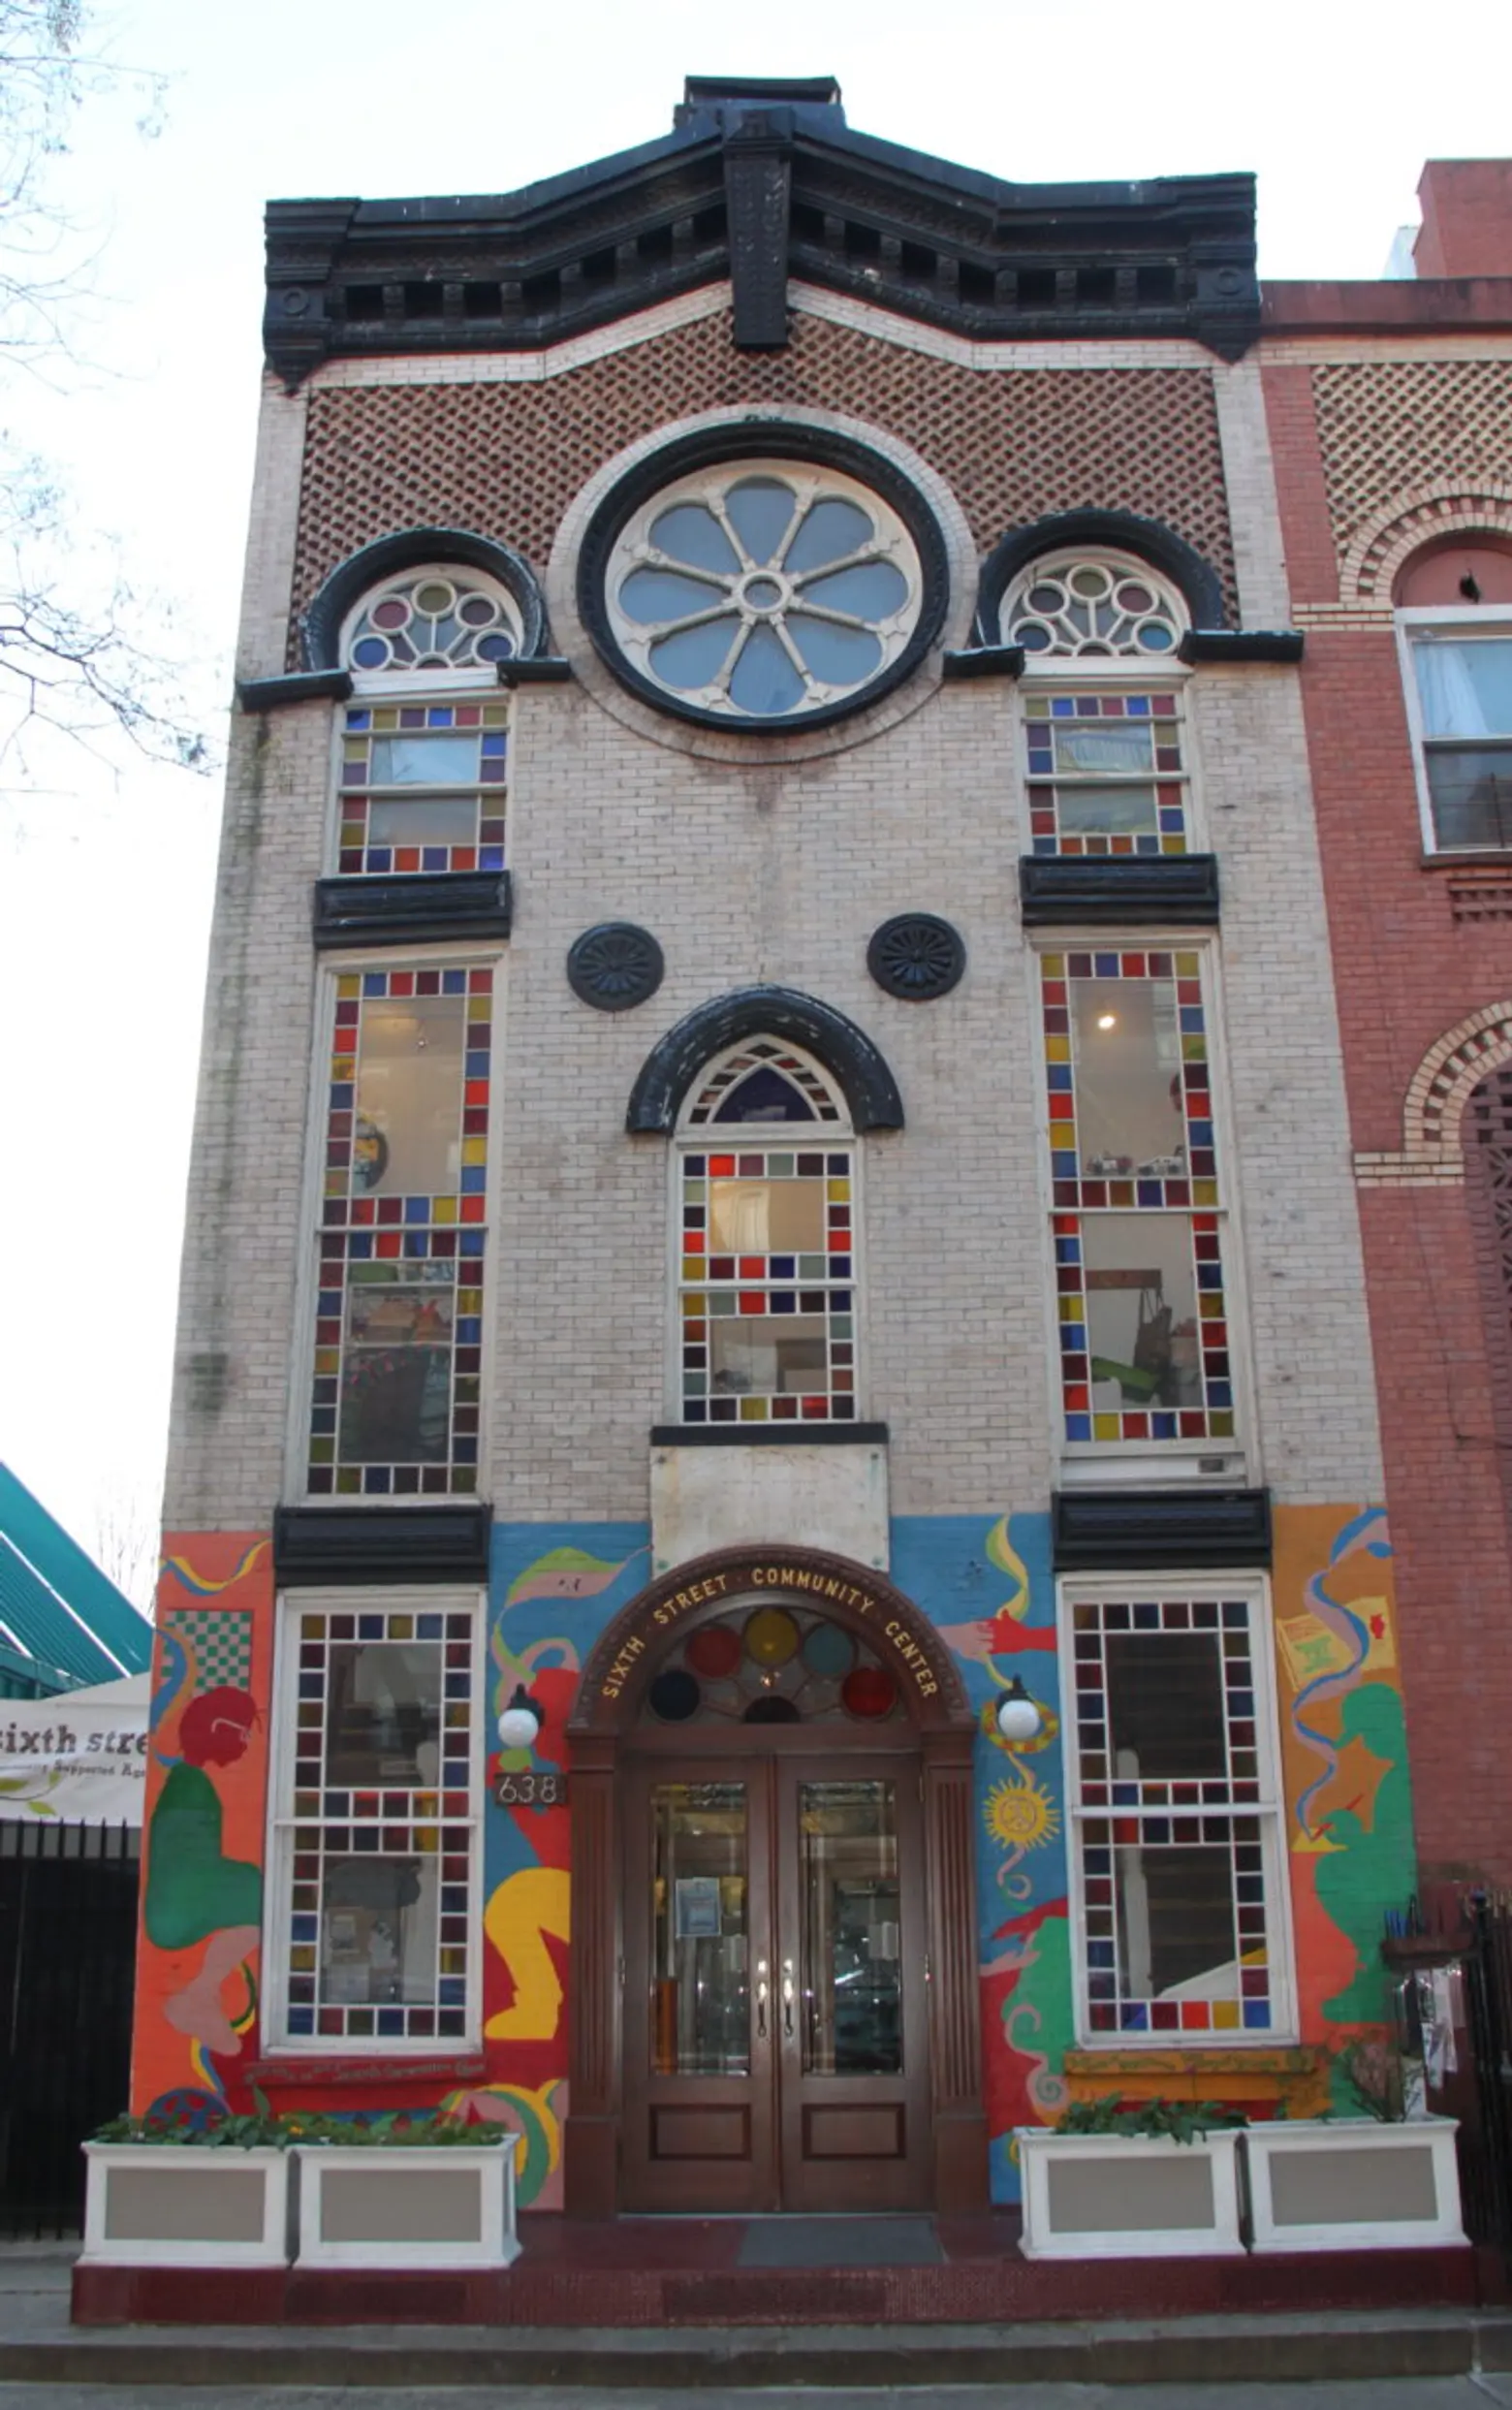 638 East 6th Street, Sixth Street Community Center, tenement synagogue